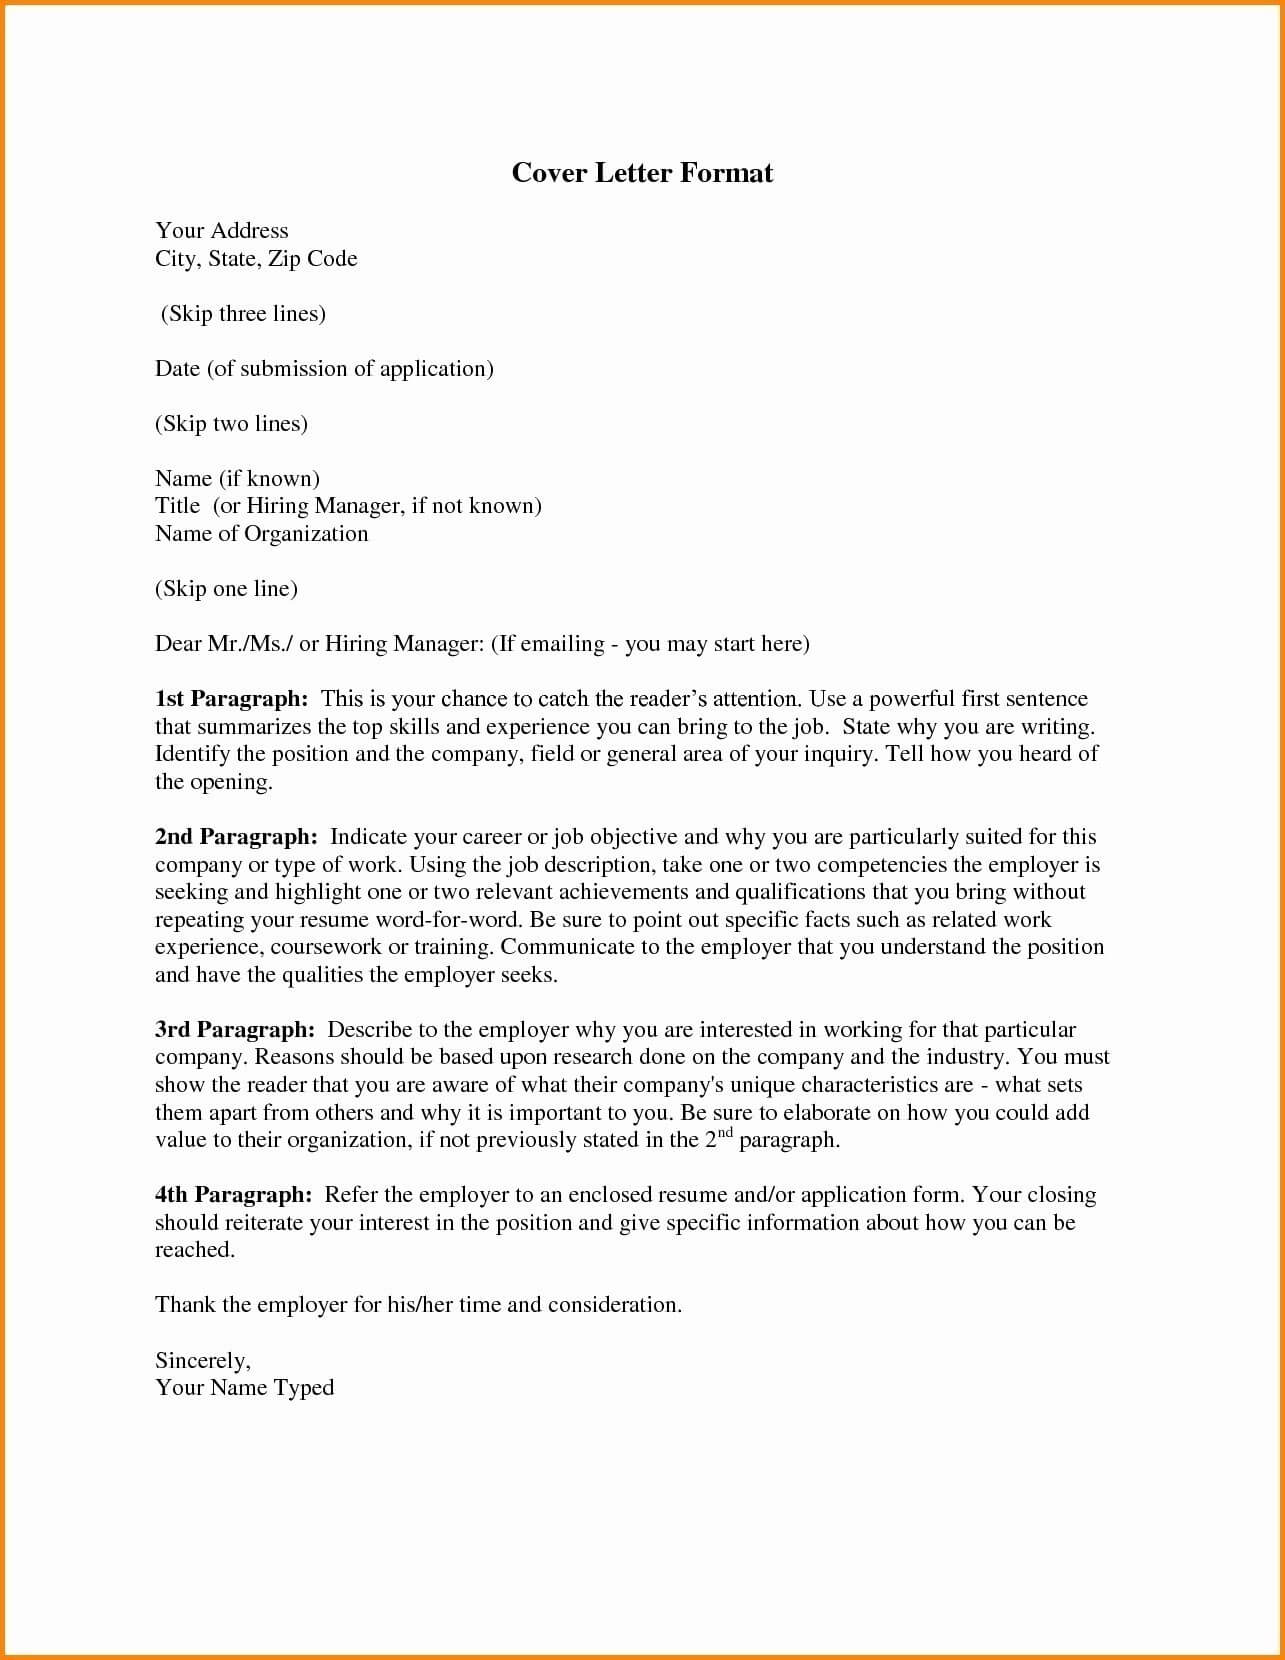 Ppi Cover Letter | Resume Ideas With Regard To Ppi Claim Letter Template For Credit Card